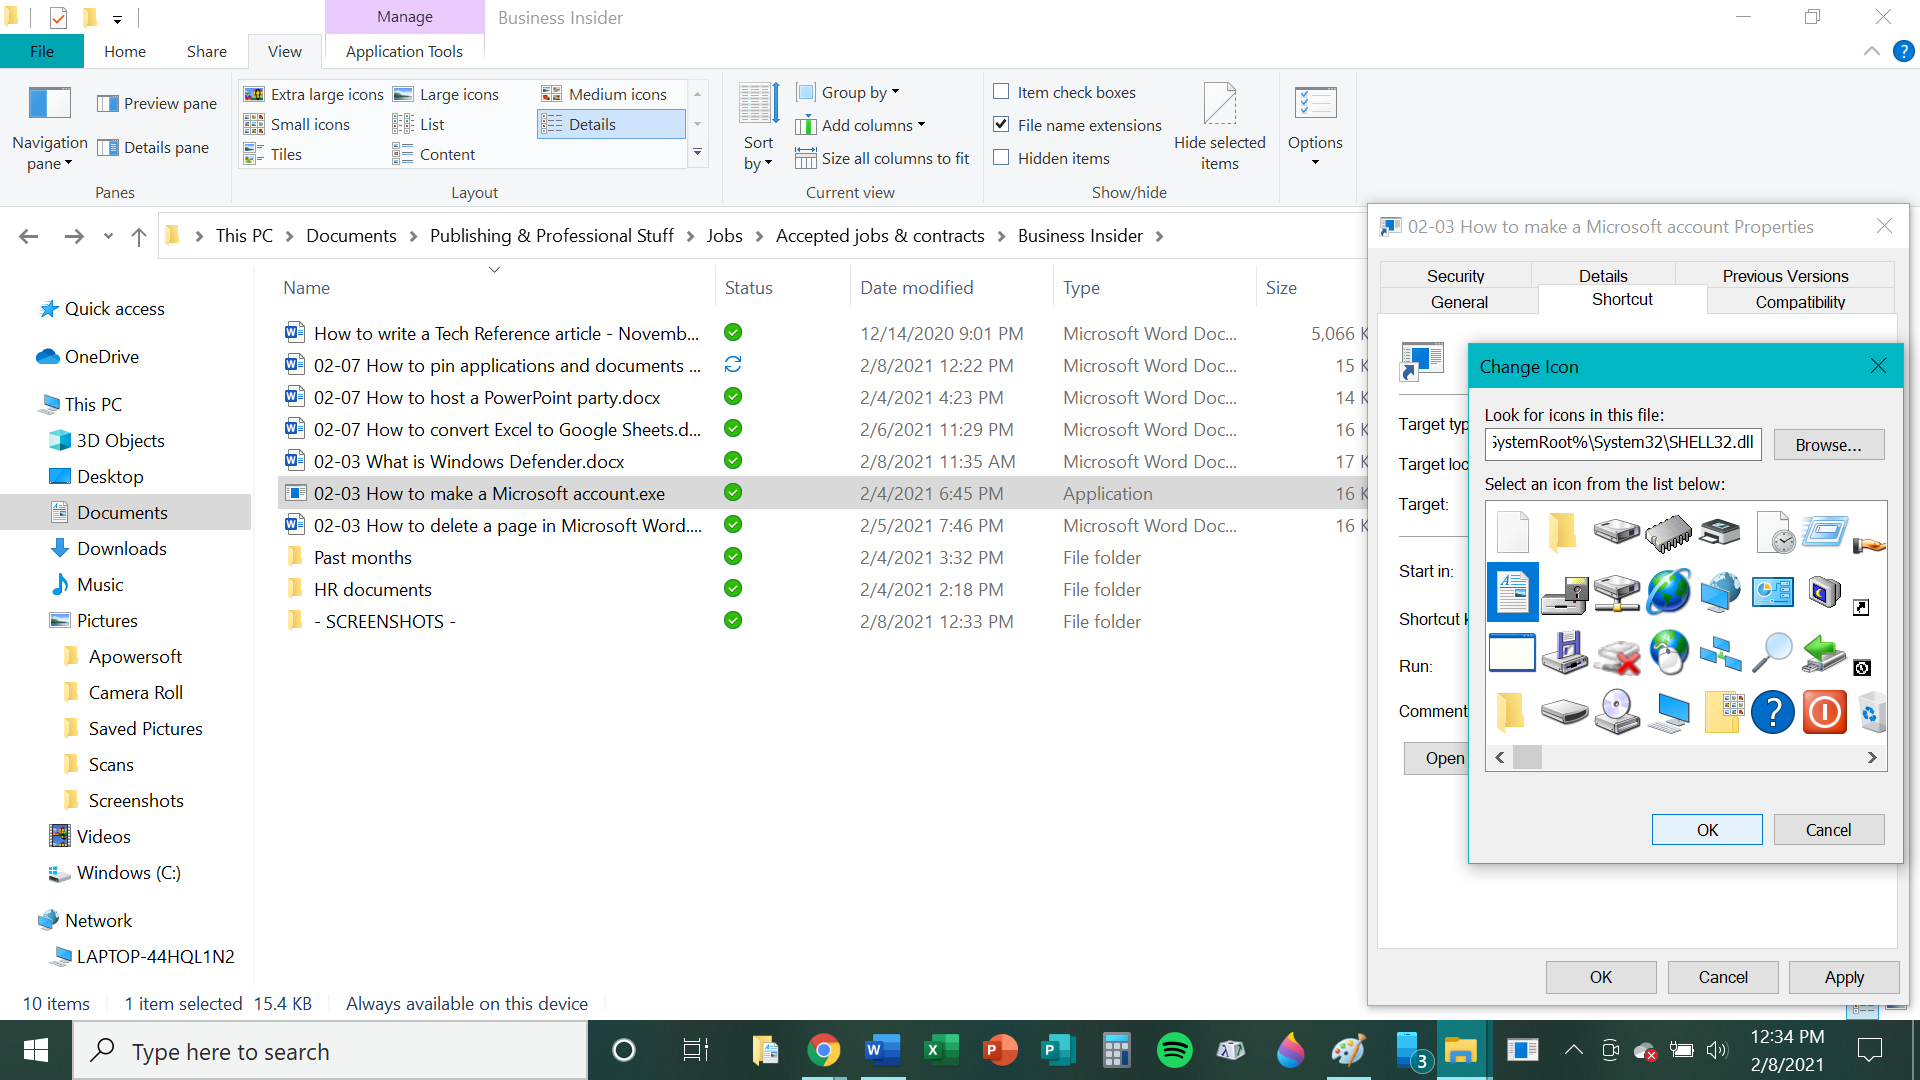 How to pin applications and documents on the Windows taskbar   11